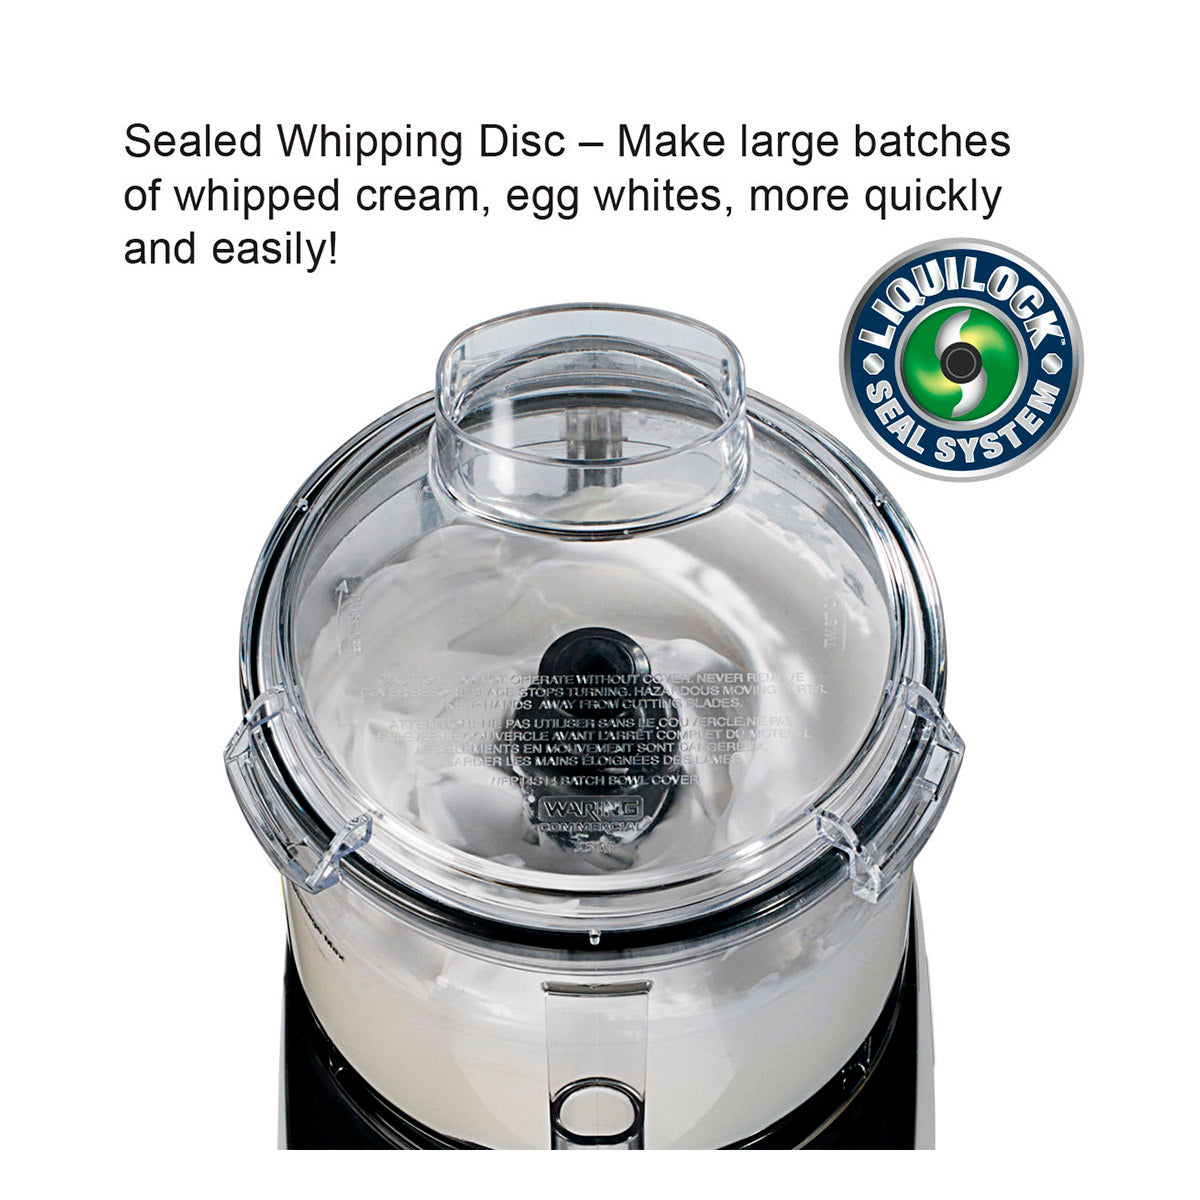 WFP11SW - 2.5-Qt. Bowl Cutter Mixer with Flat Lid and LiquiLock Seal System by Waring Commercial